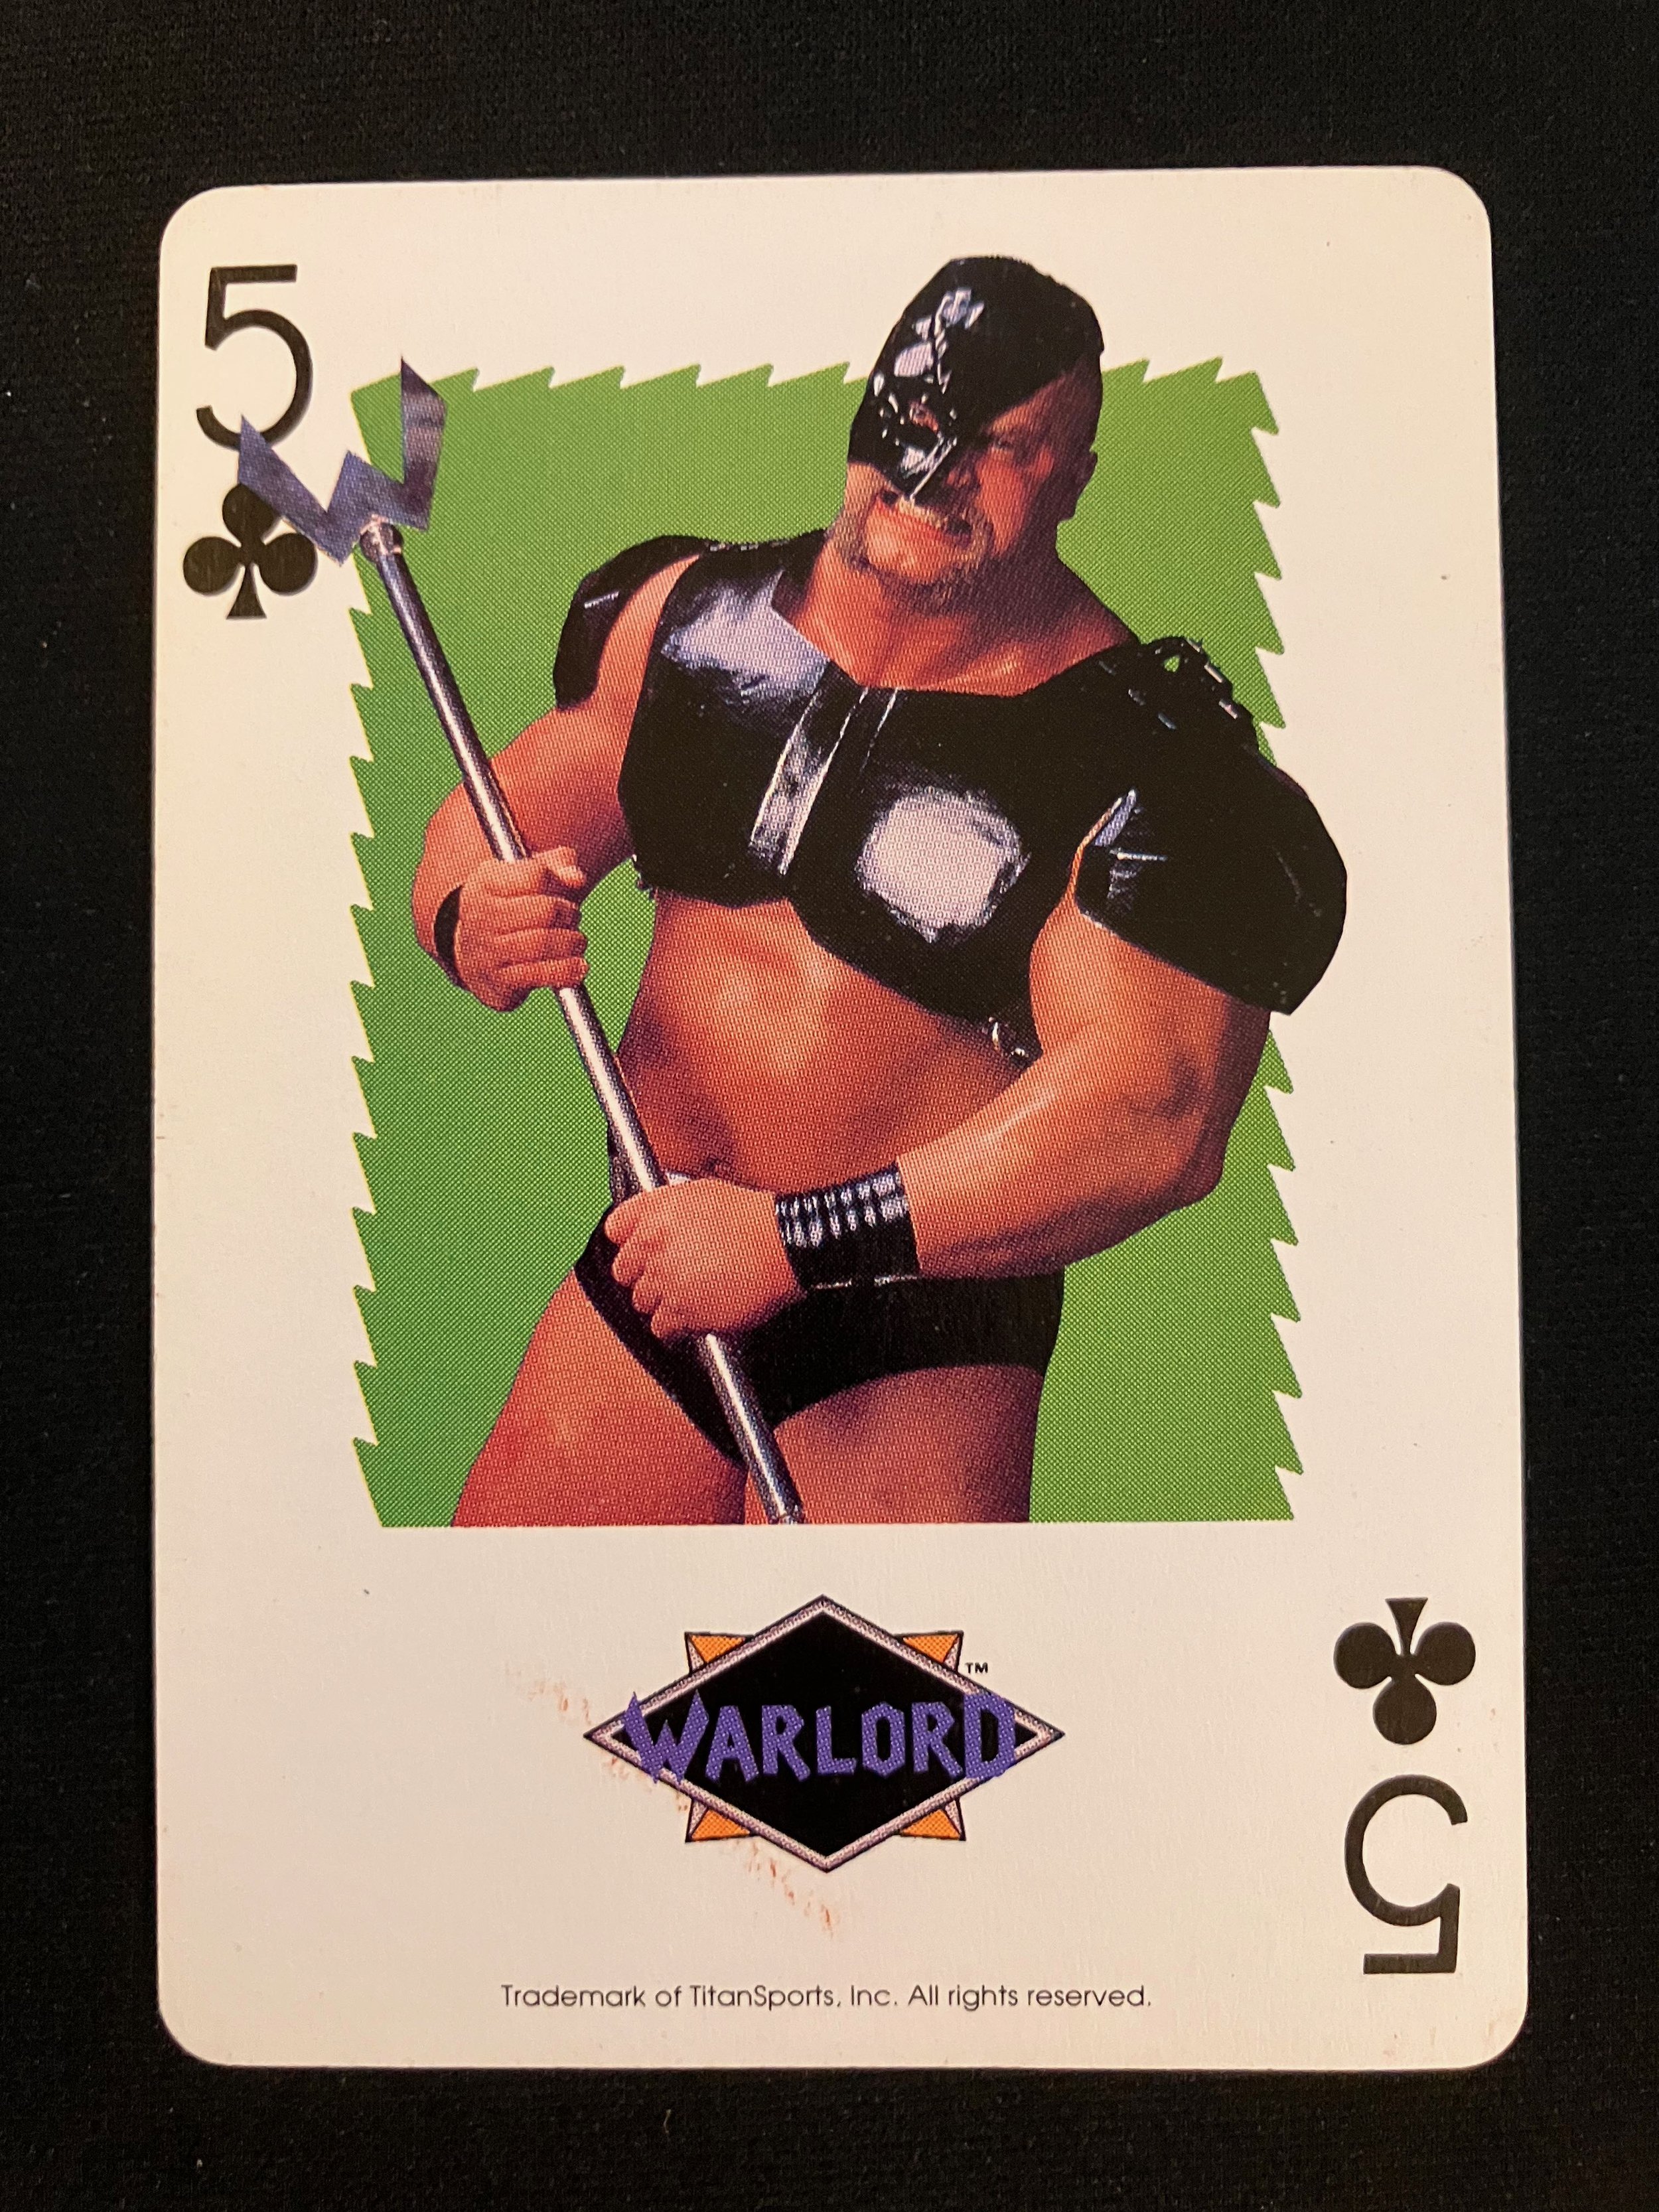 5 of Clubs - Warlord